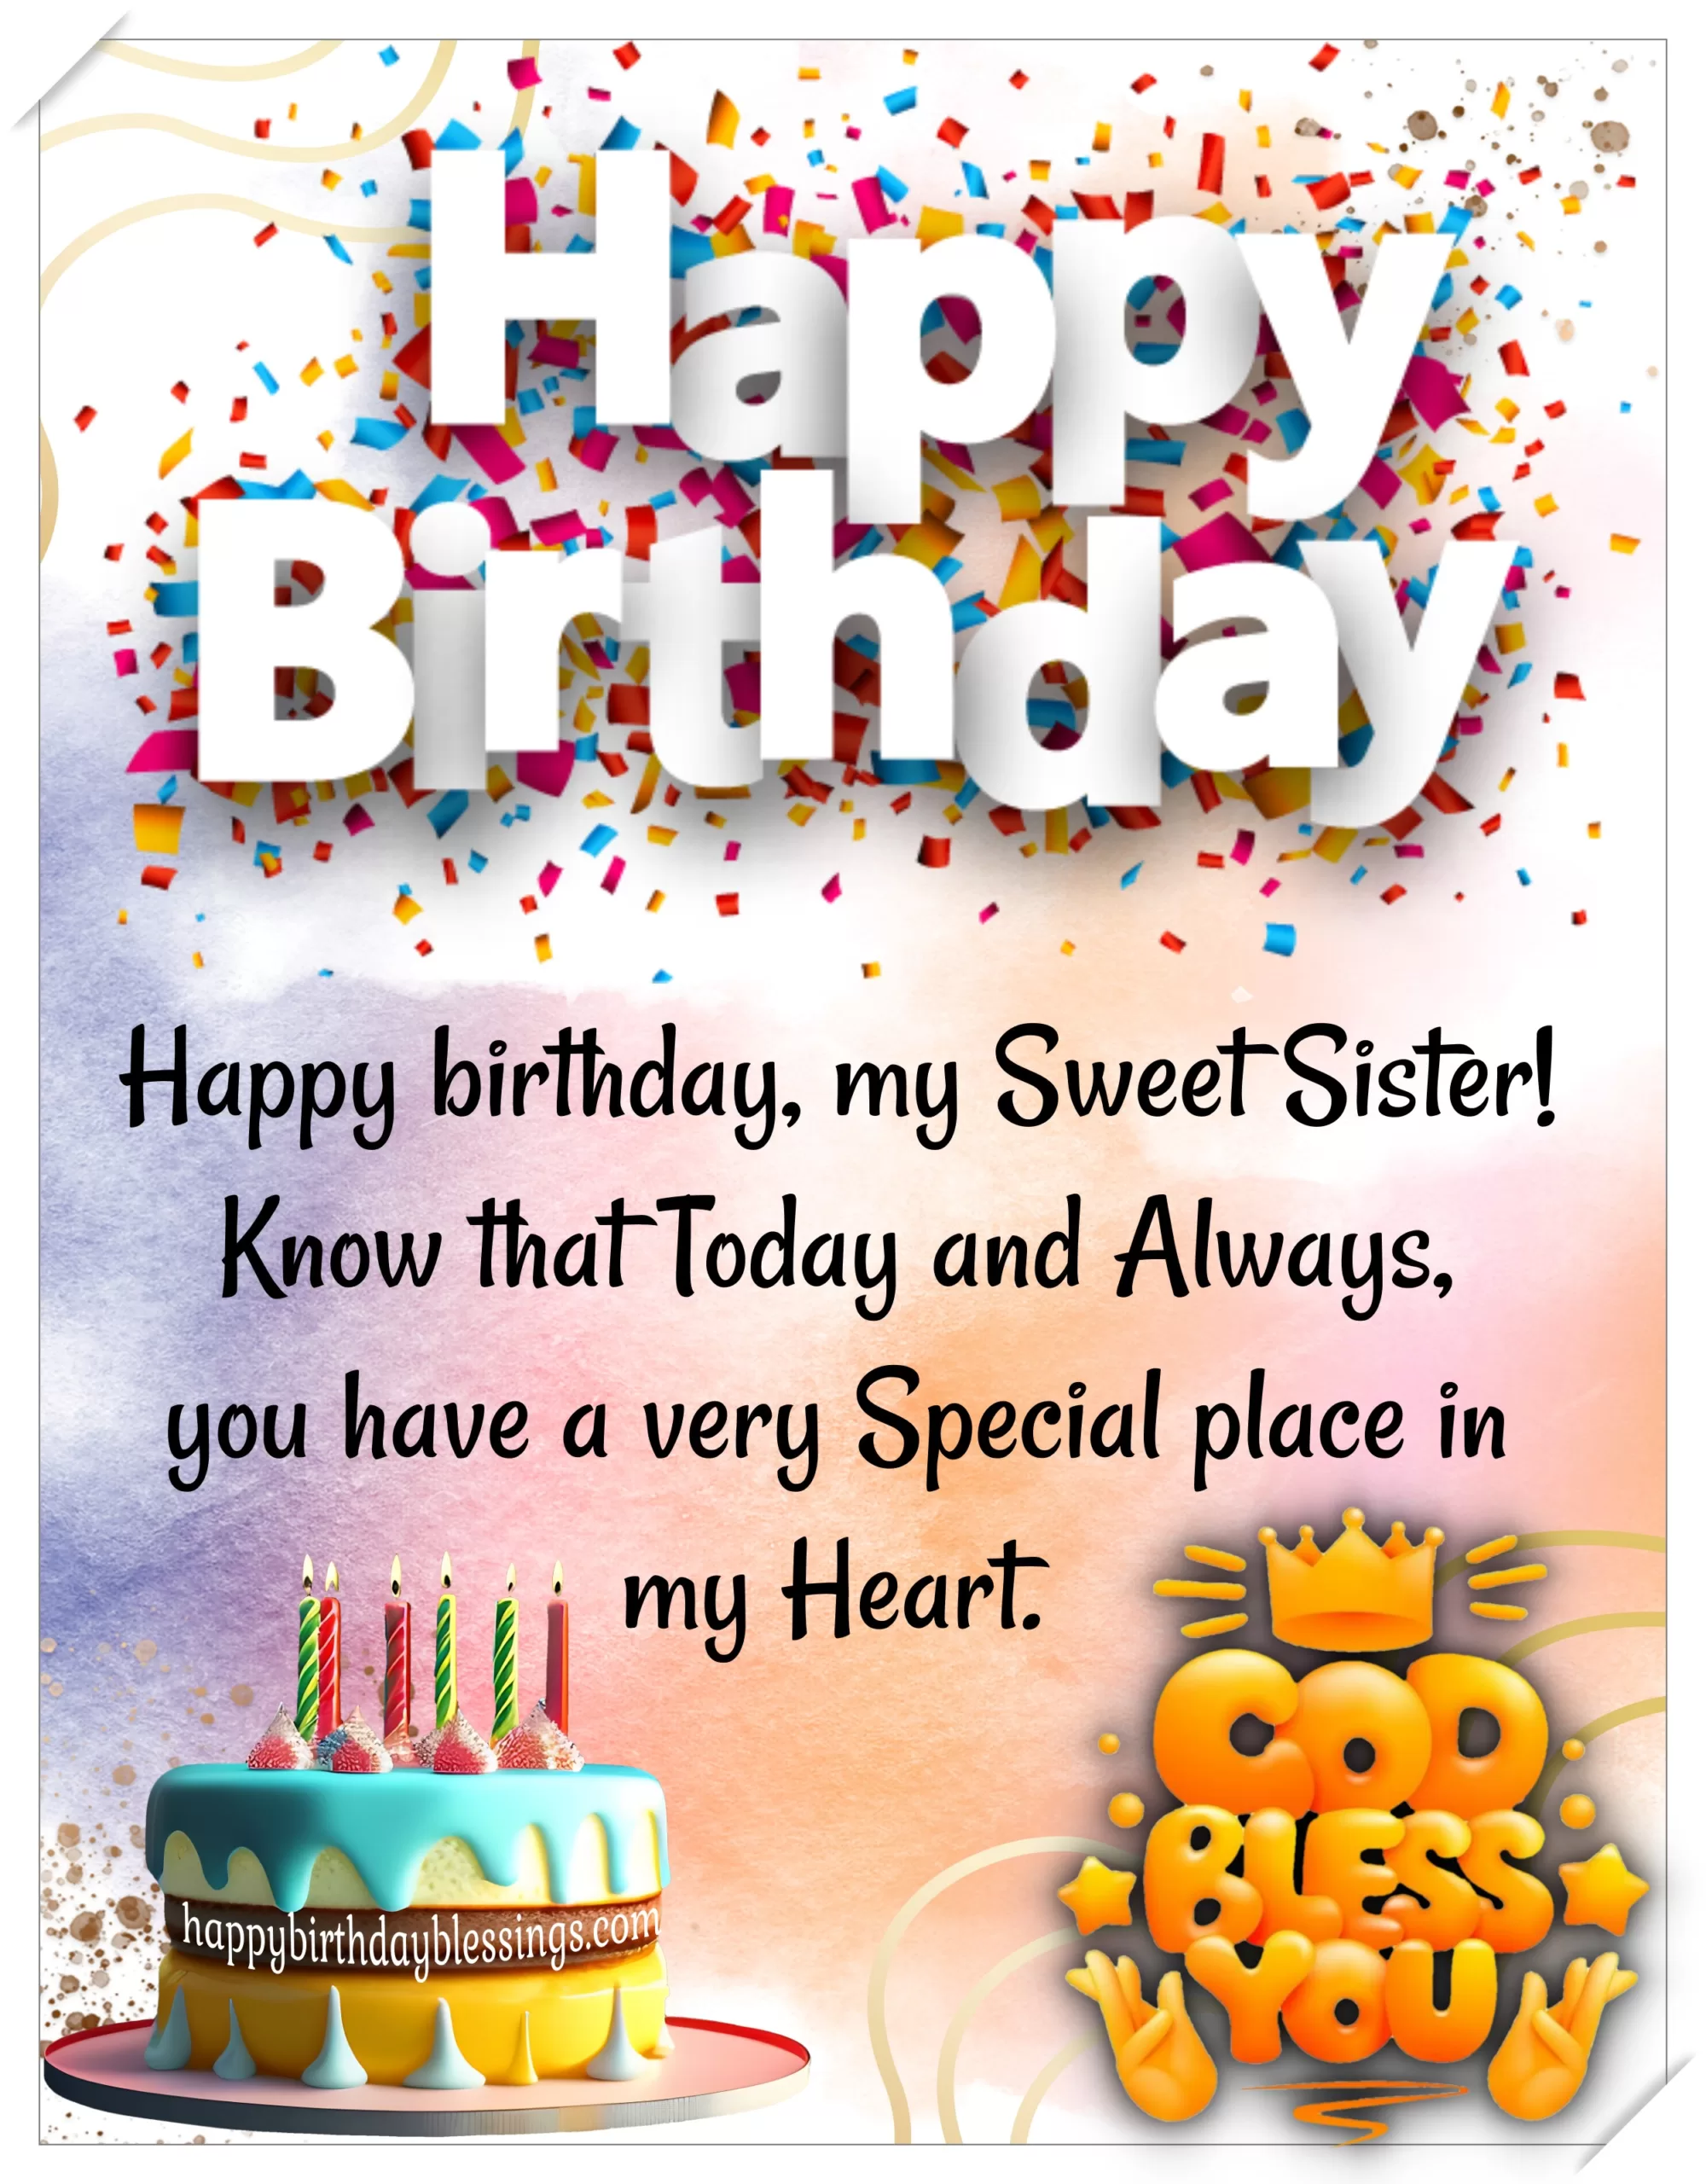 Heartfelt Birthday Wishes For Your Sister